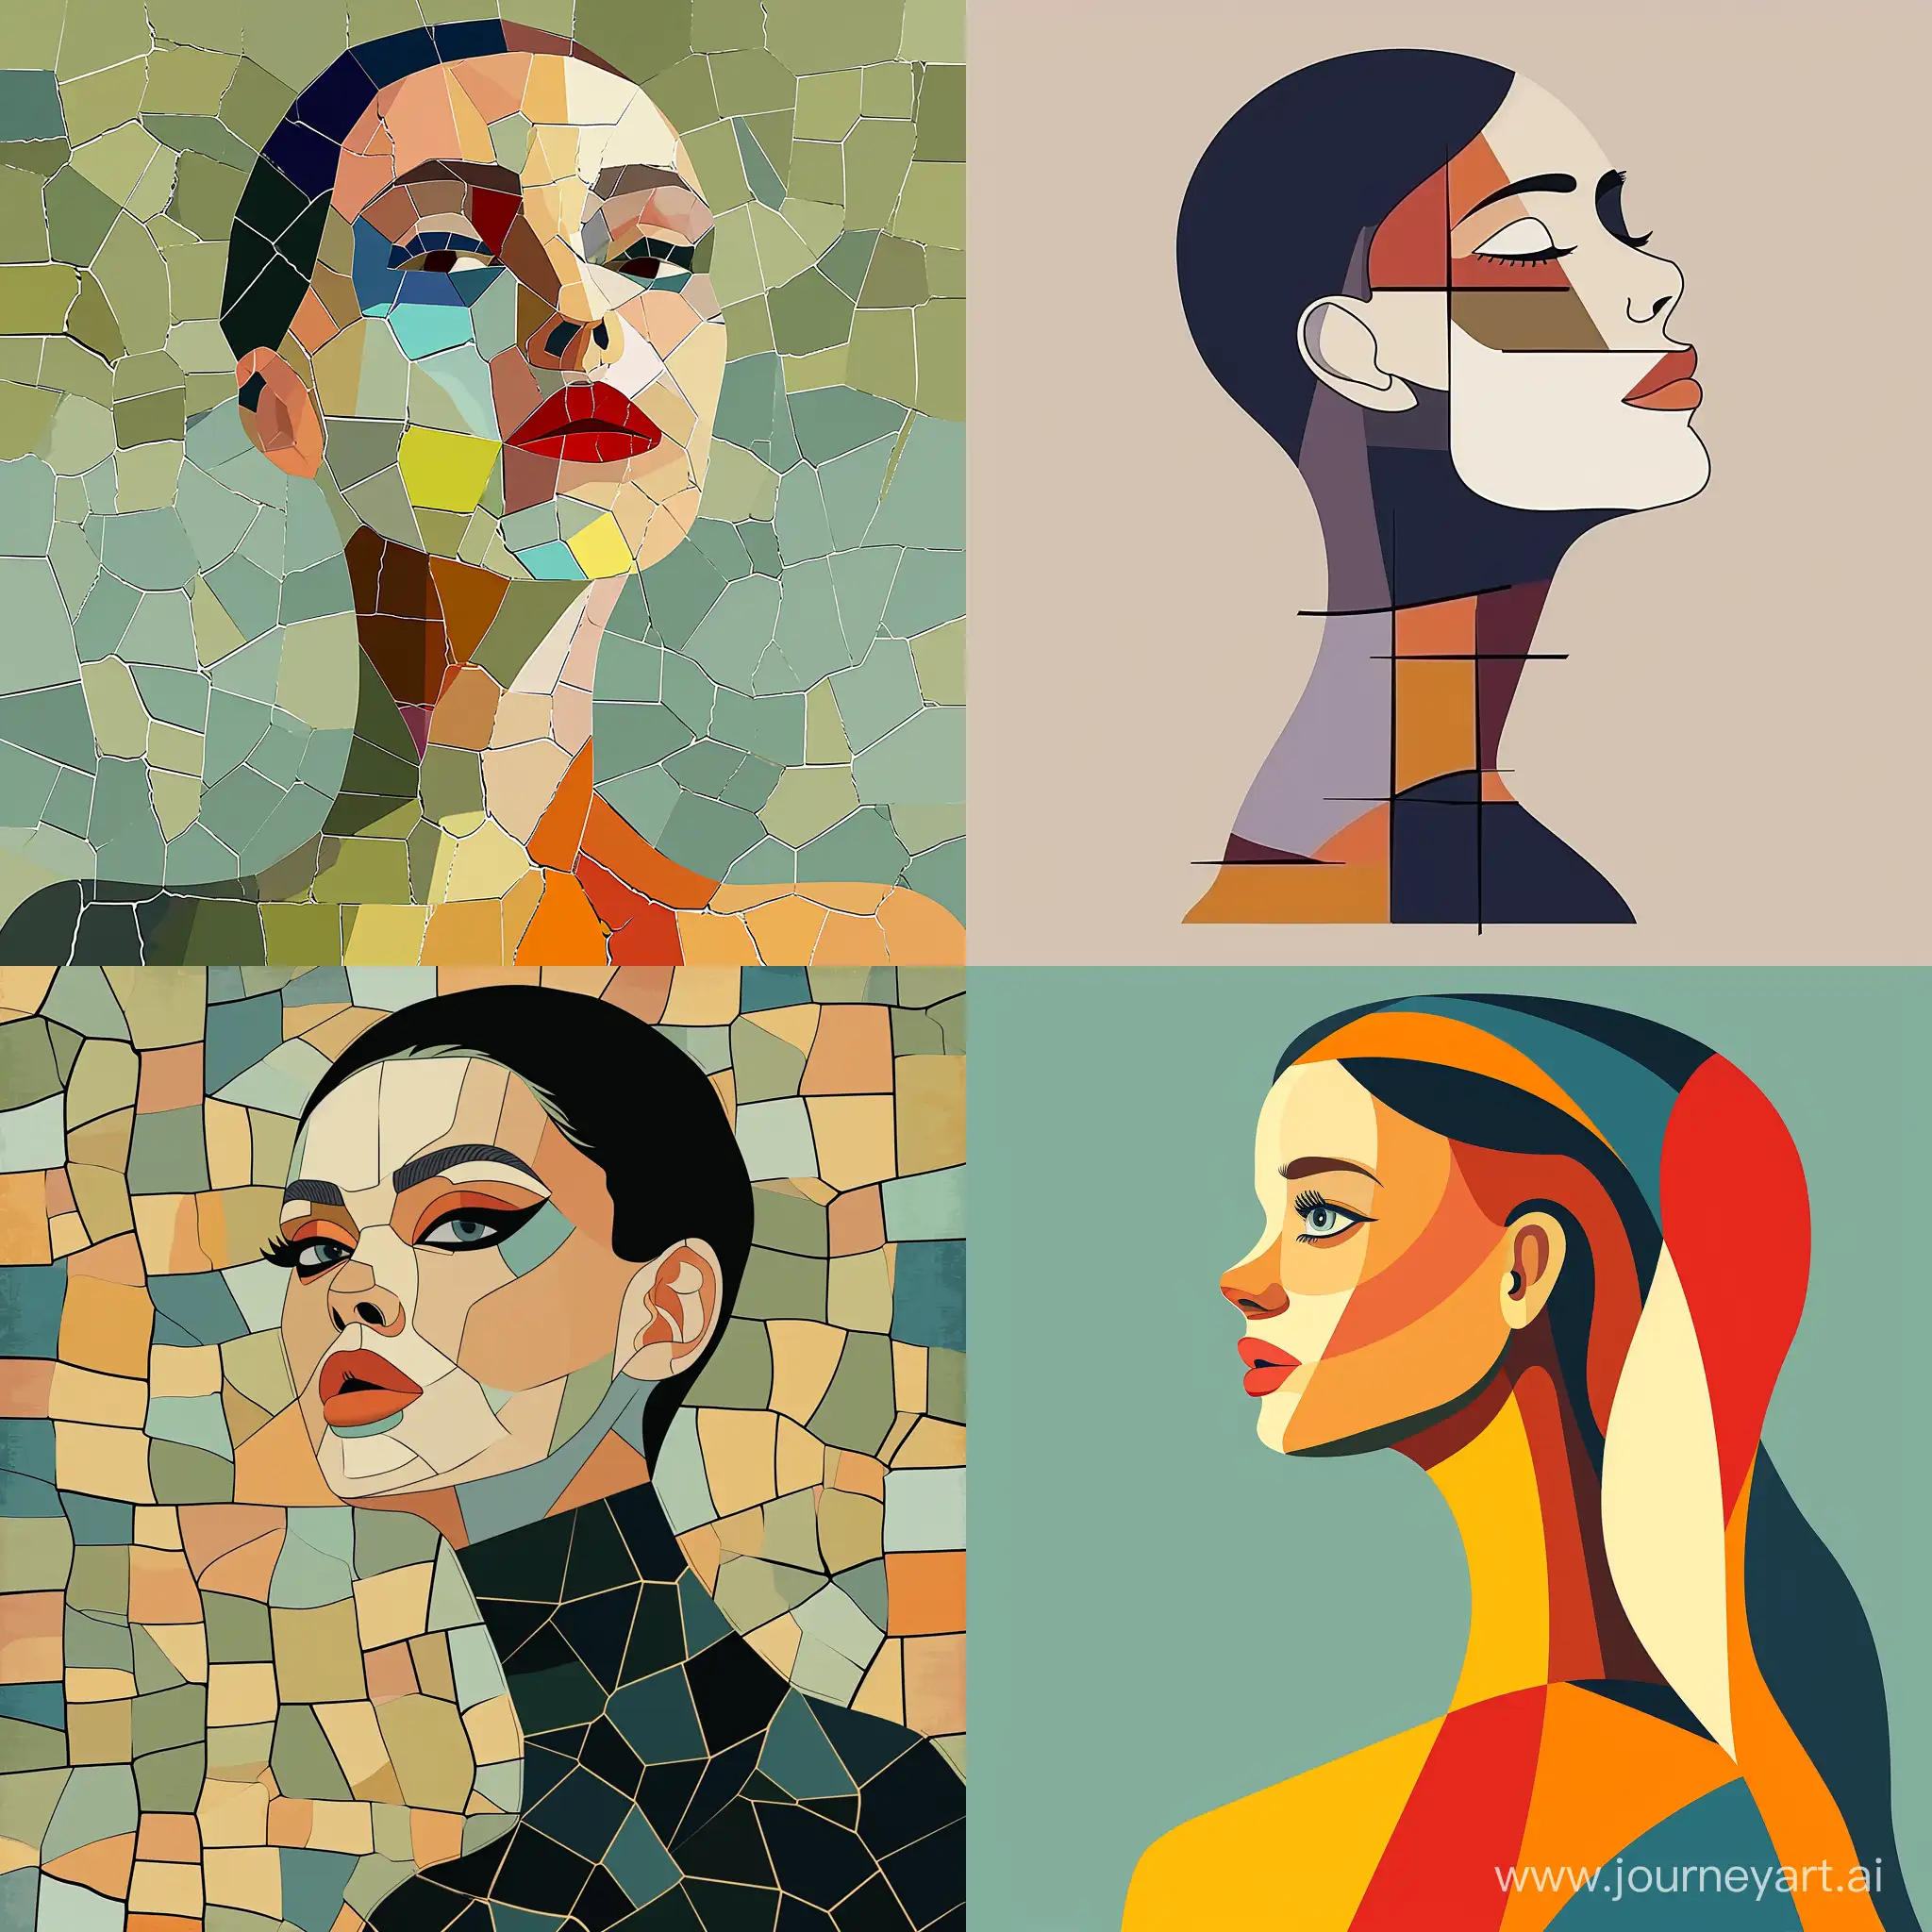 Mozaic style woman abstract portrait, harmonious colour palette, with harmony of shapes and textures with a long neck design minimalism poster caricature portrait